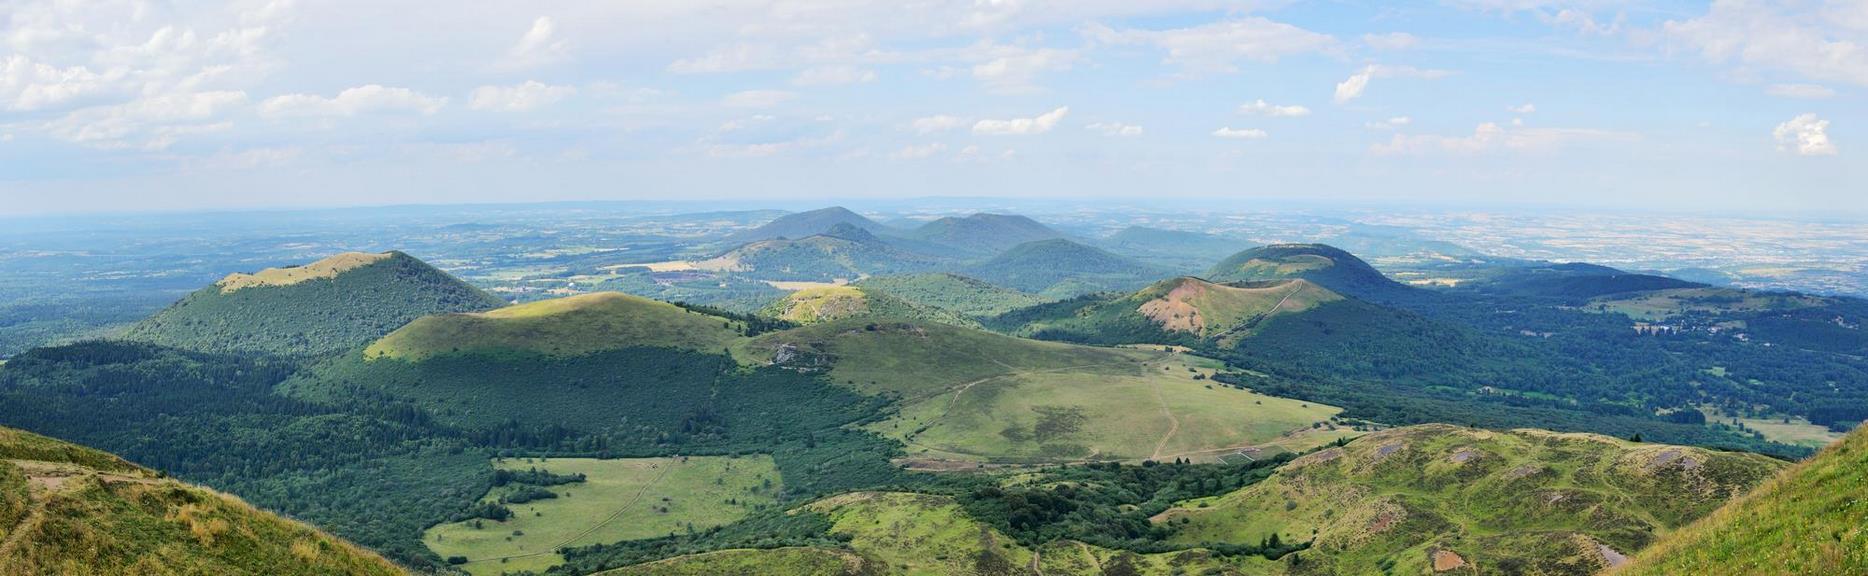 Aerial view of the Volcanoes of Auvergne